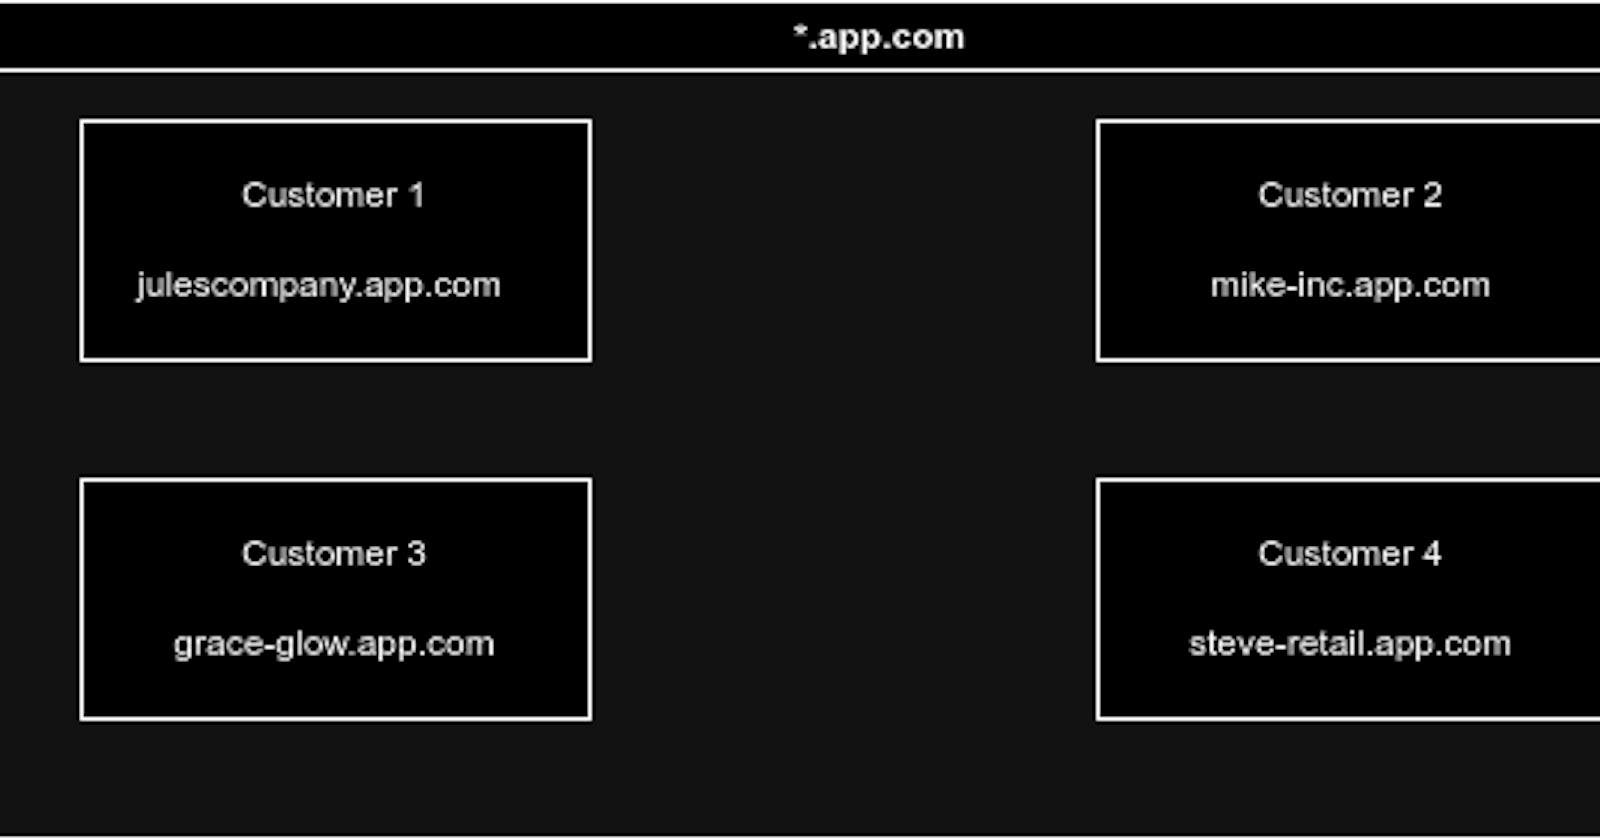 Configuring Wildcard Subdomains: A Comparison of Nginx and Caddy